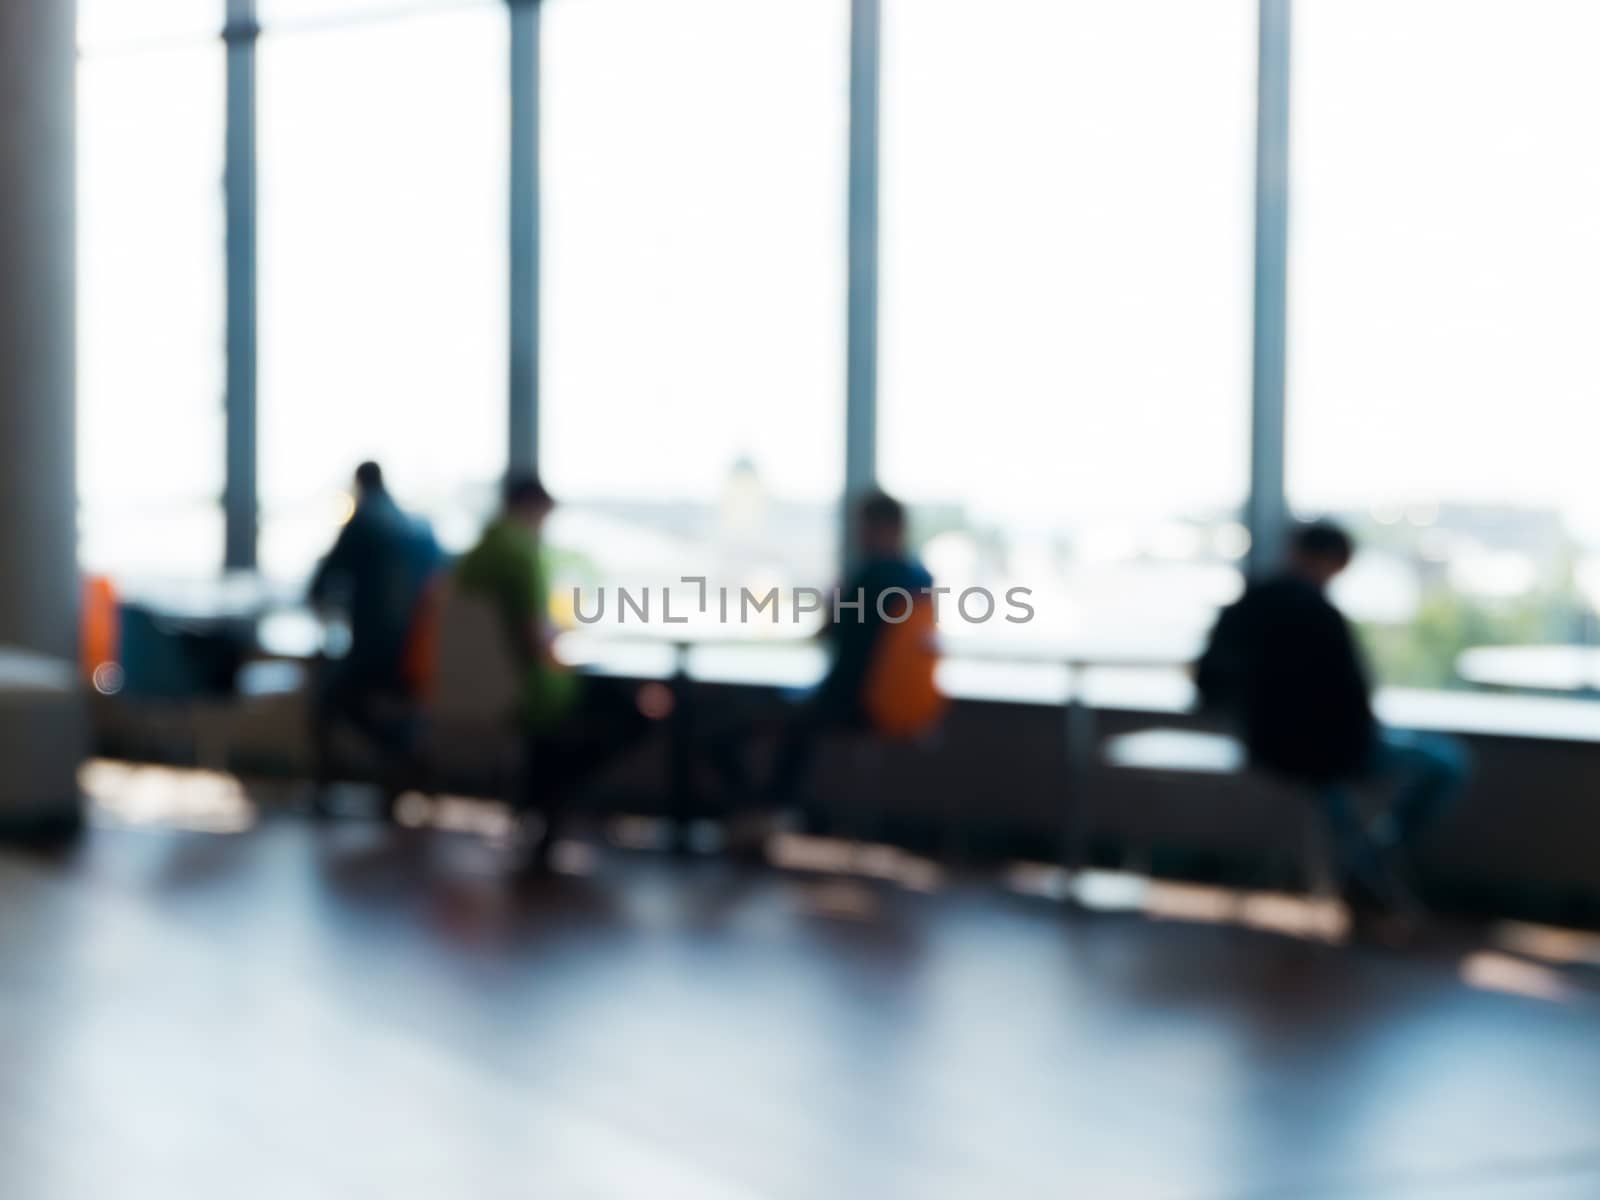 Blurred silhouettes of people sitting in a cafe. by fascinadora